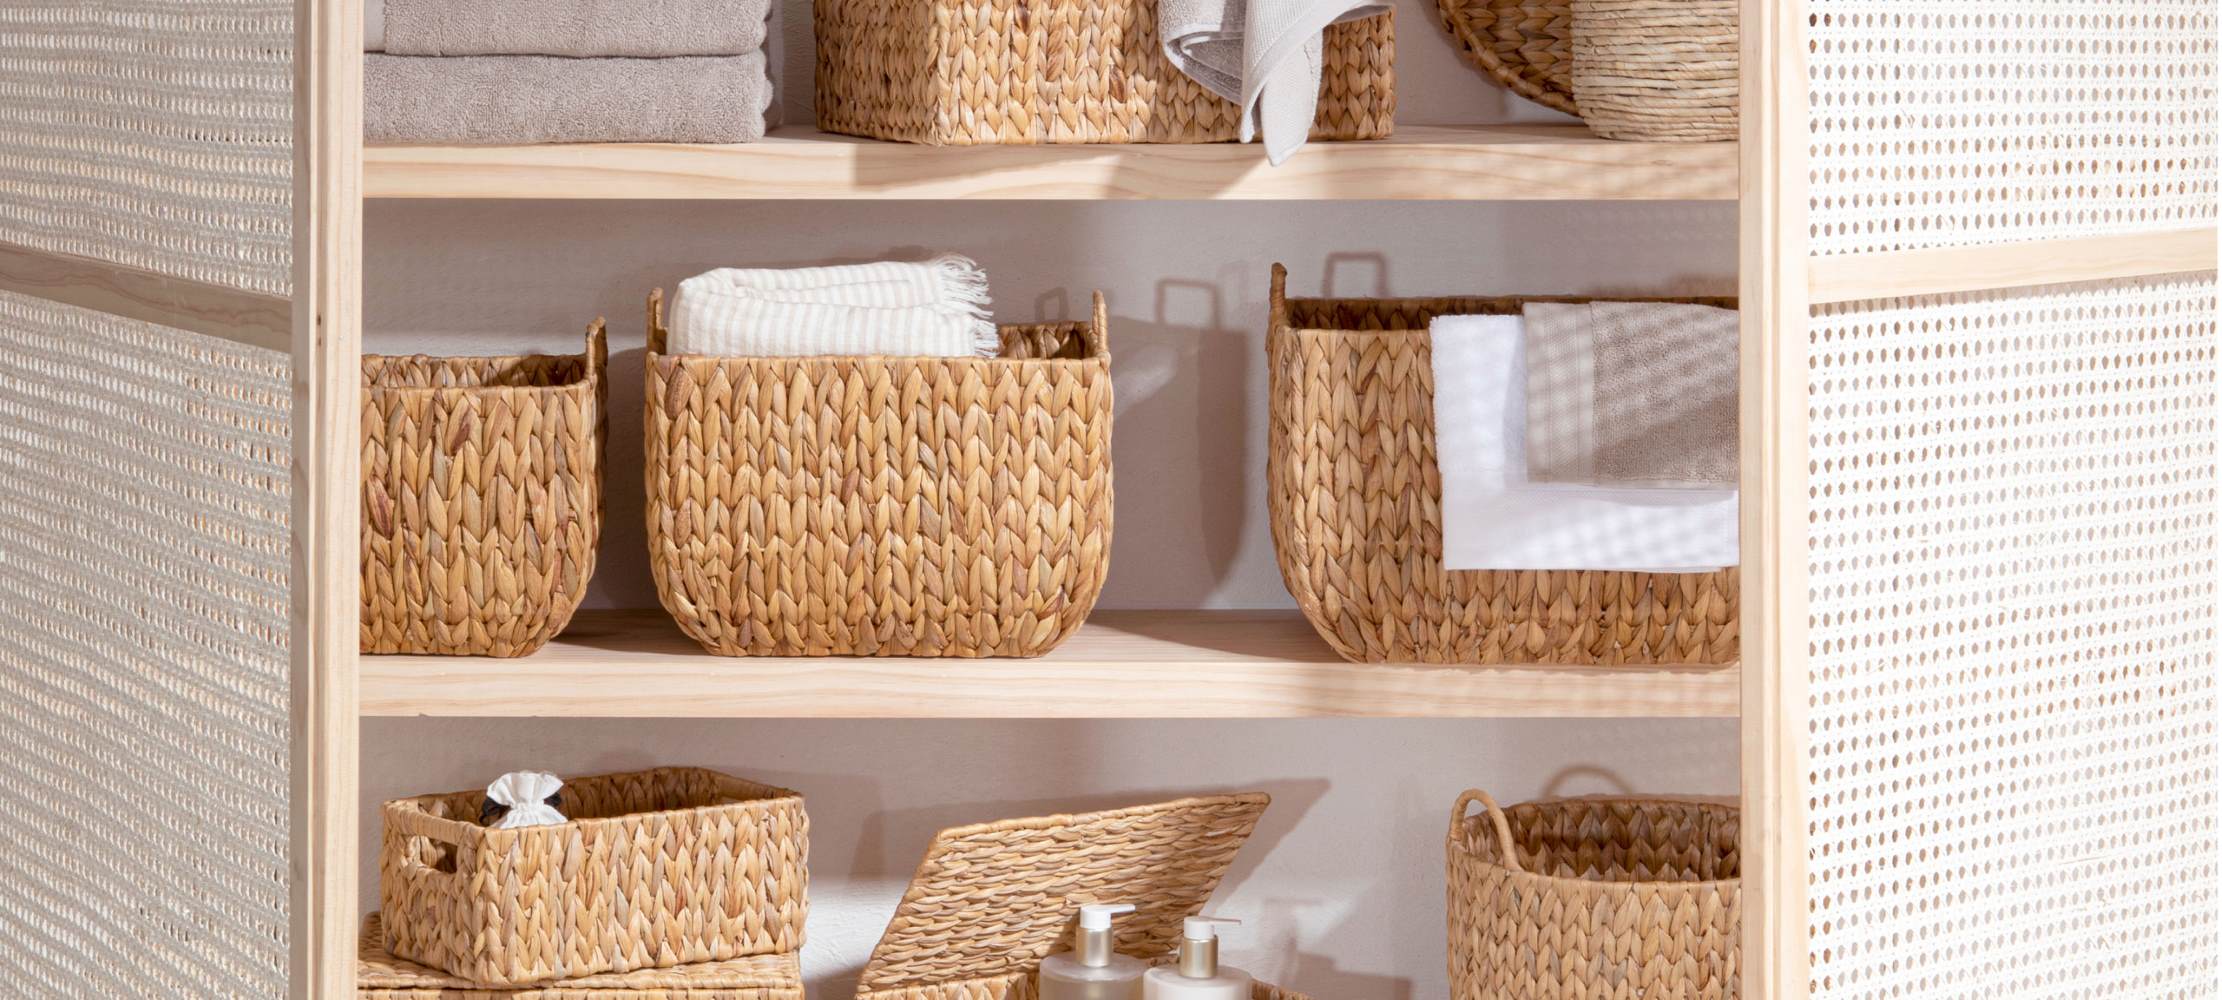 Top Storage Baskets Review: Organize with Style